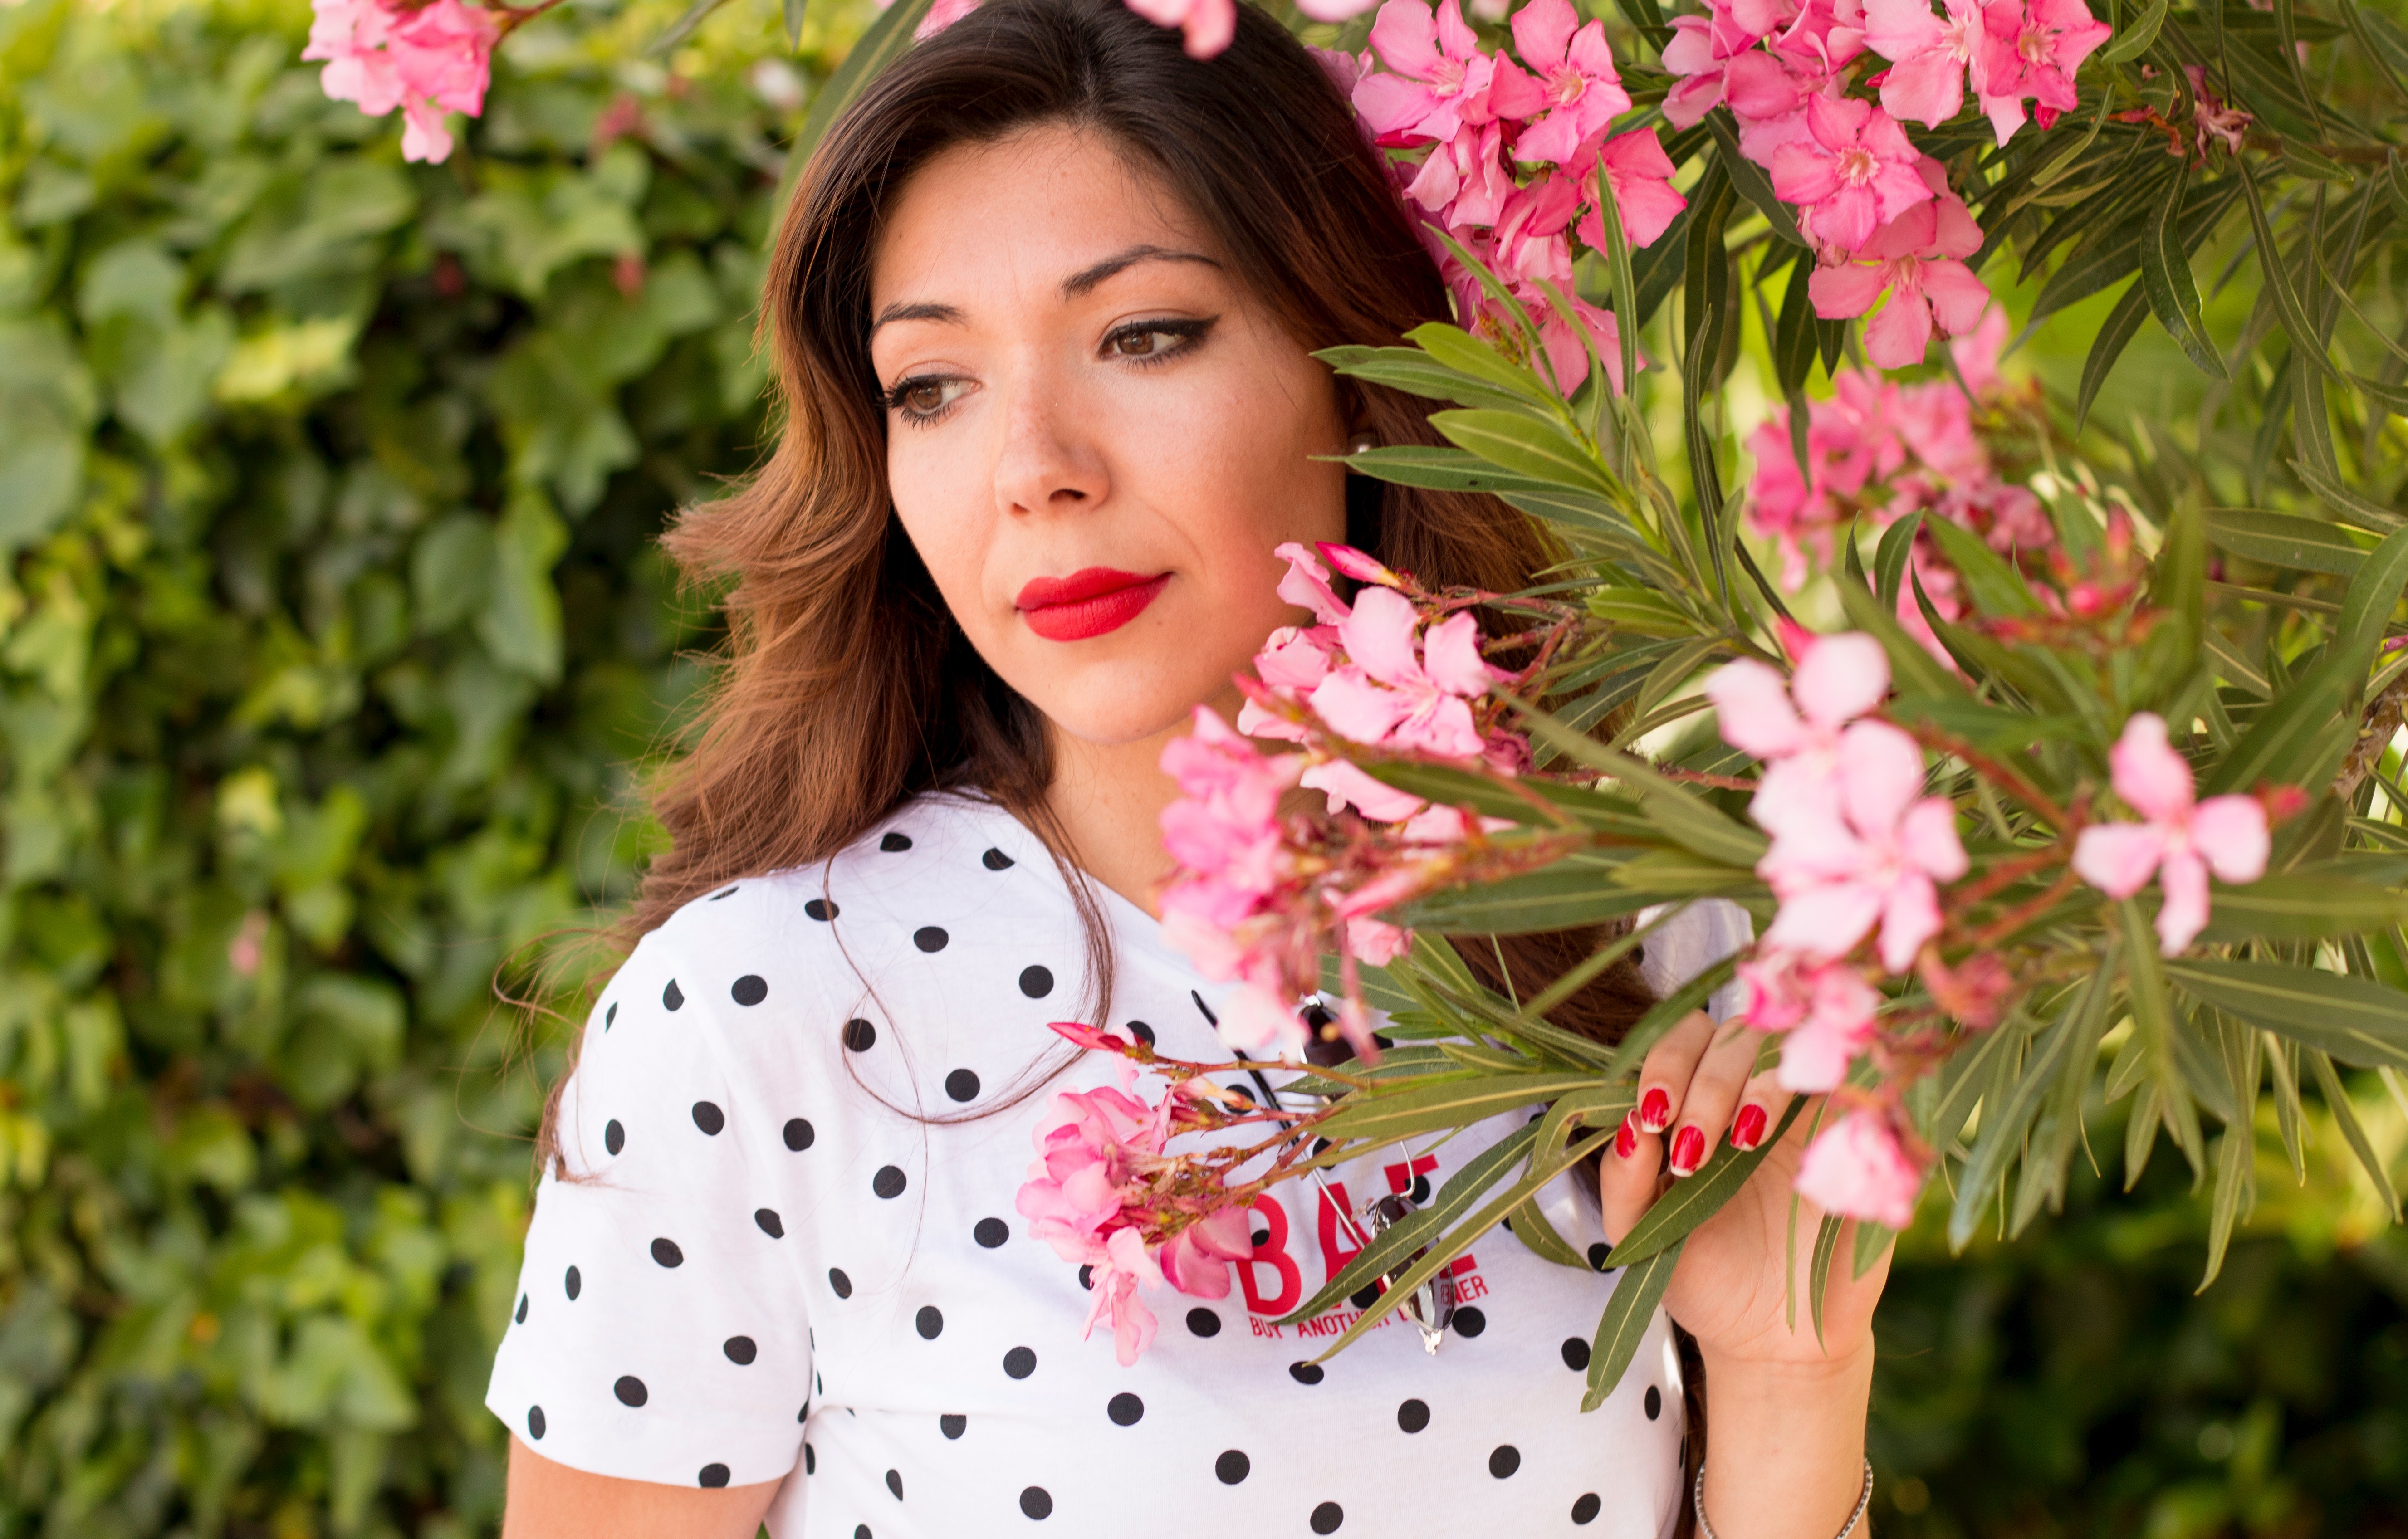 Woman in white and black polka dots dress near pink flowers during daylight photo